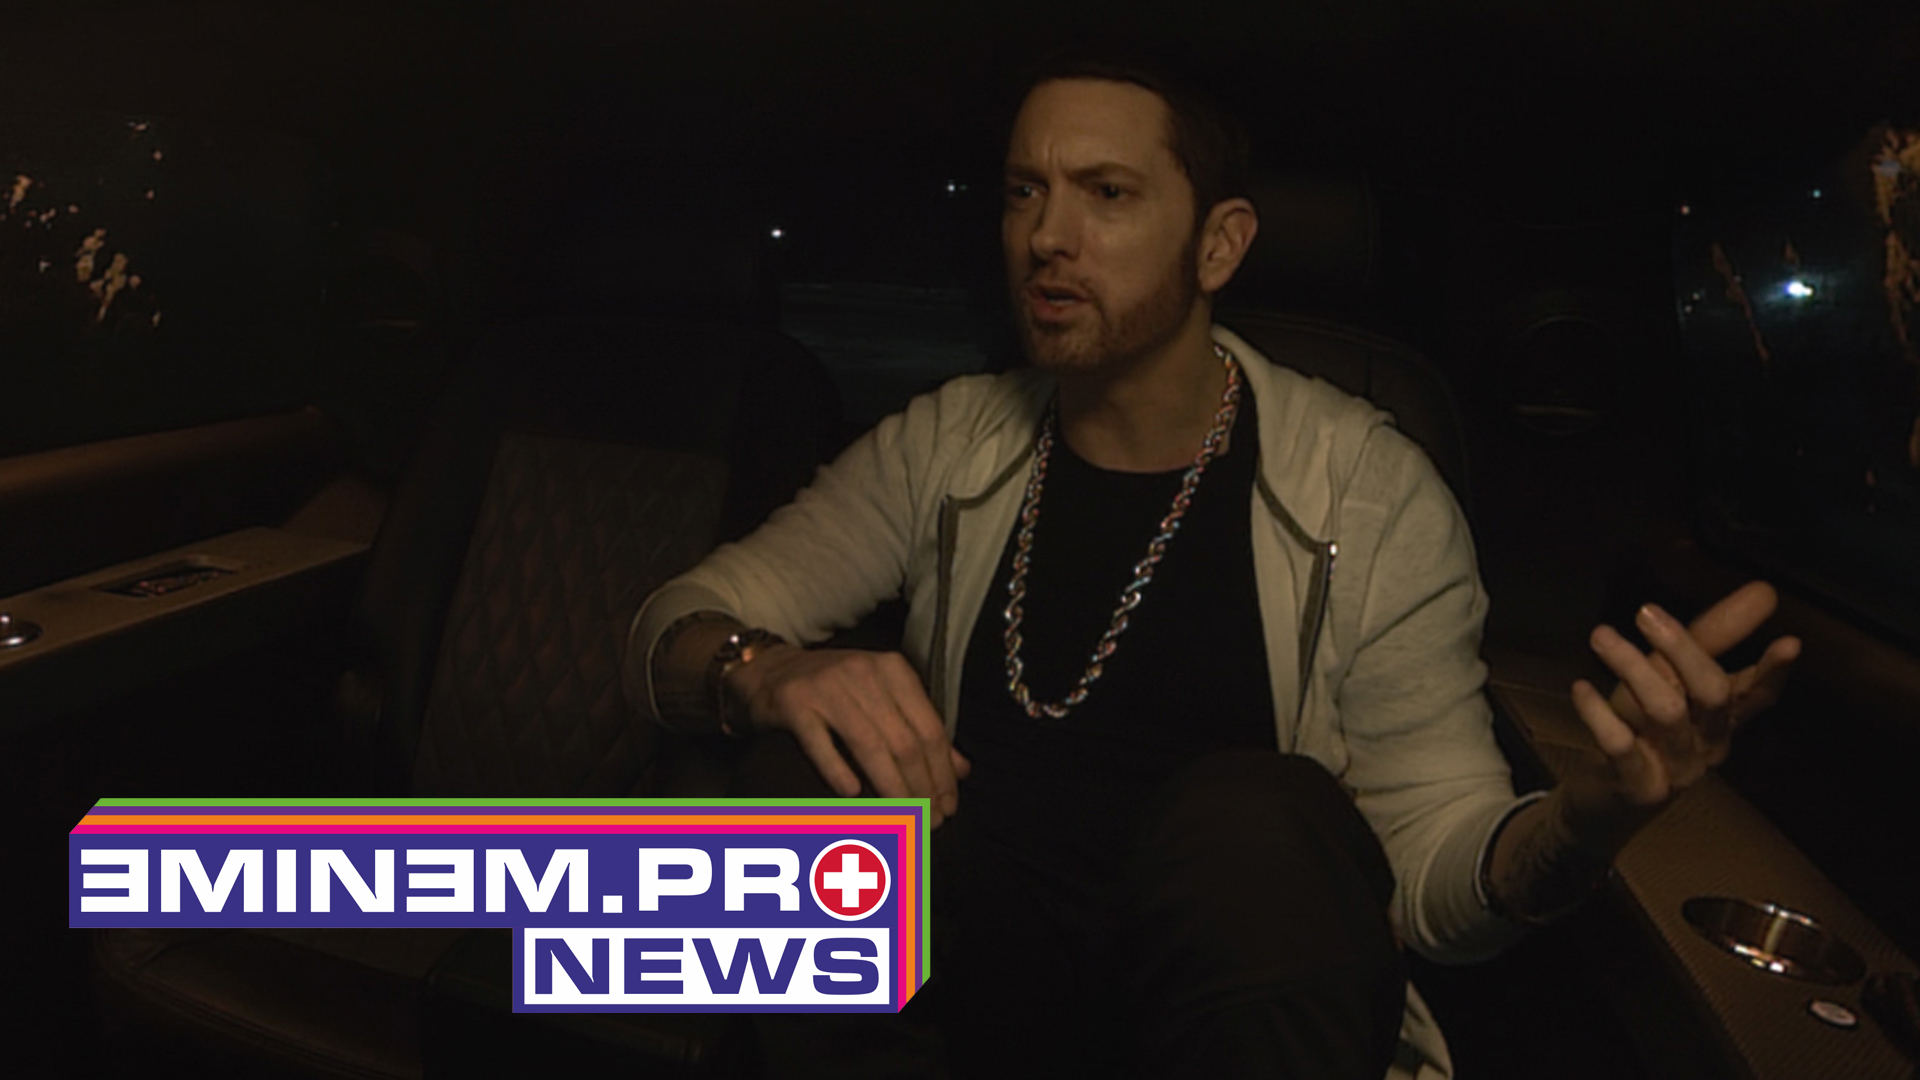 Watch the teaser with Eminem from the upcoming movie 